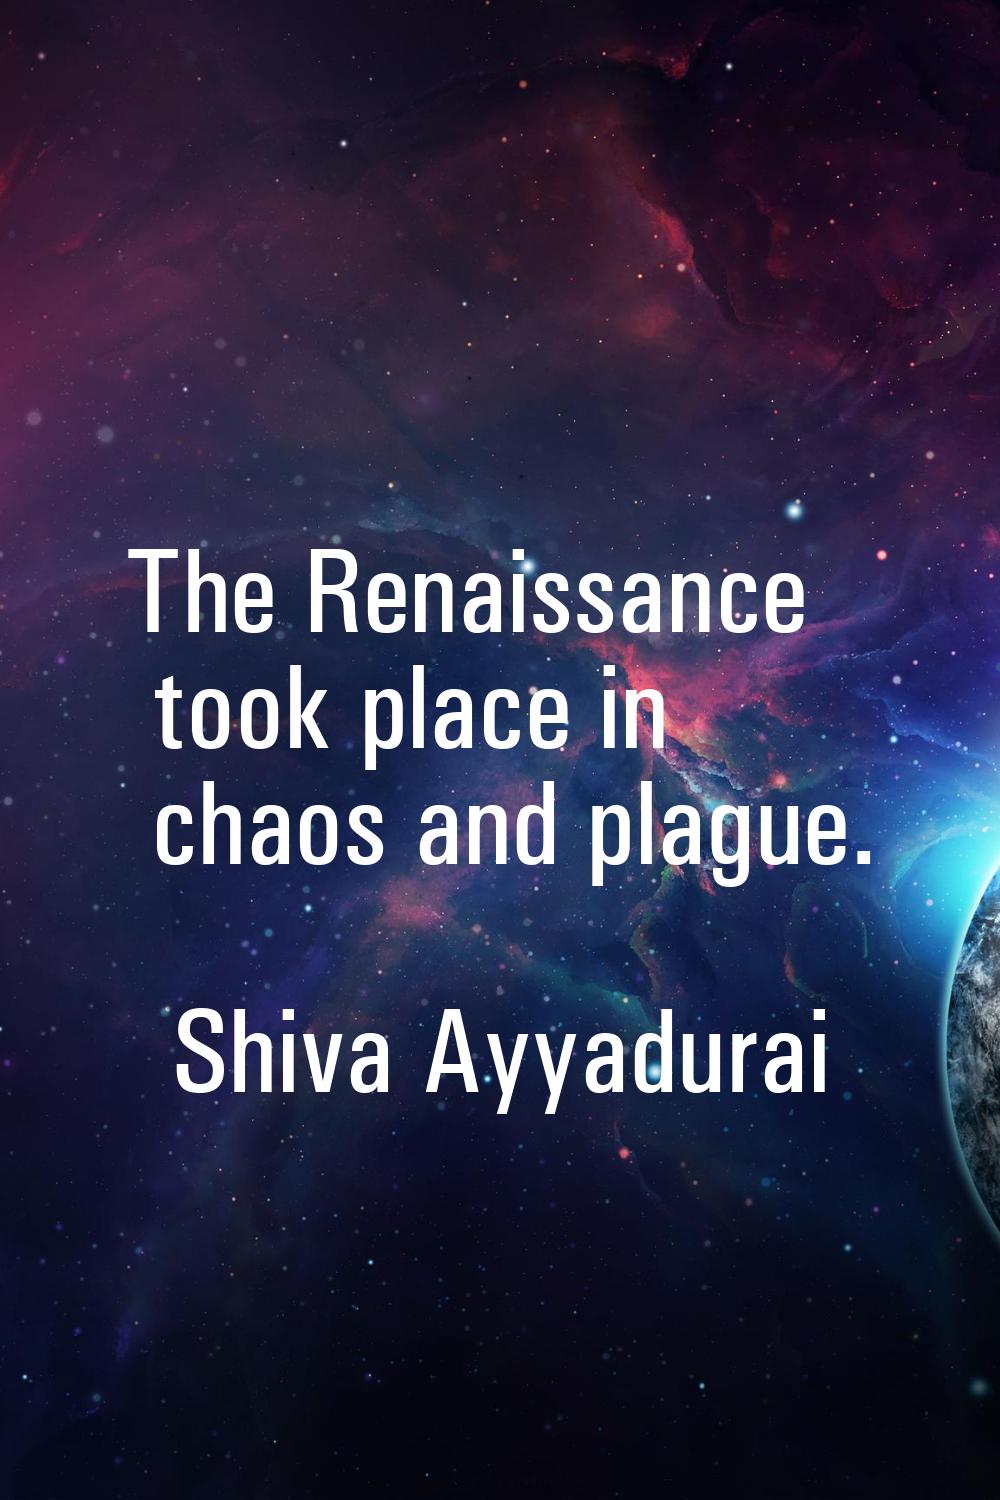 The Renaissance took place in chaos and plague.